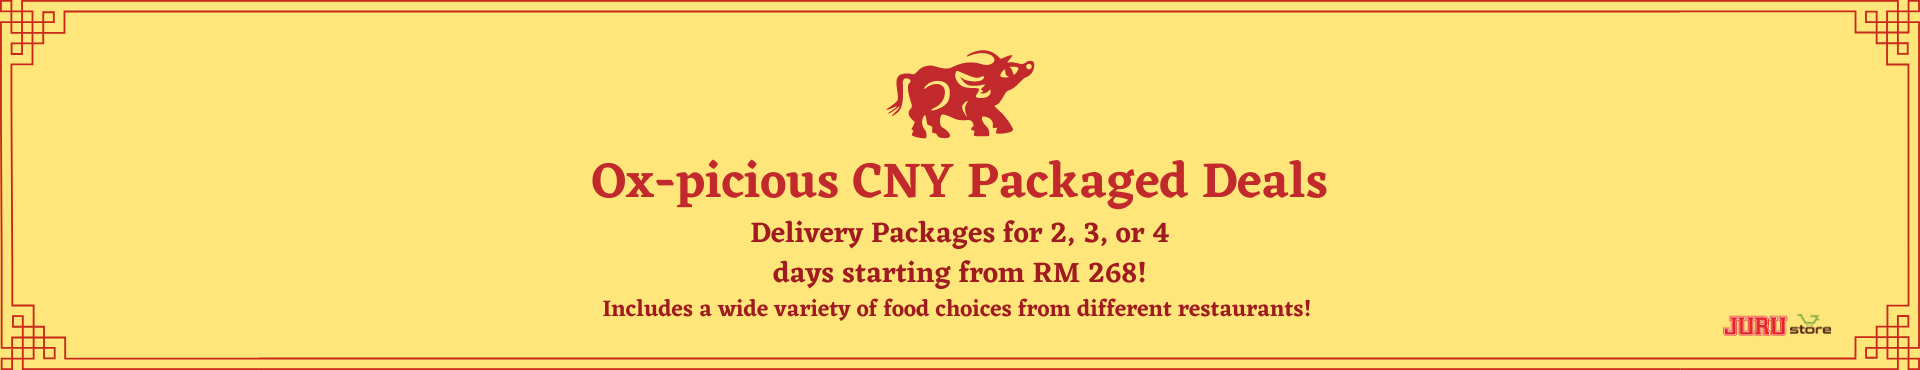 Ox-picious CNY Packaged Deals 牛年新年特备配套，别错过!